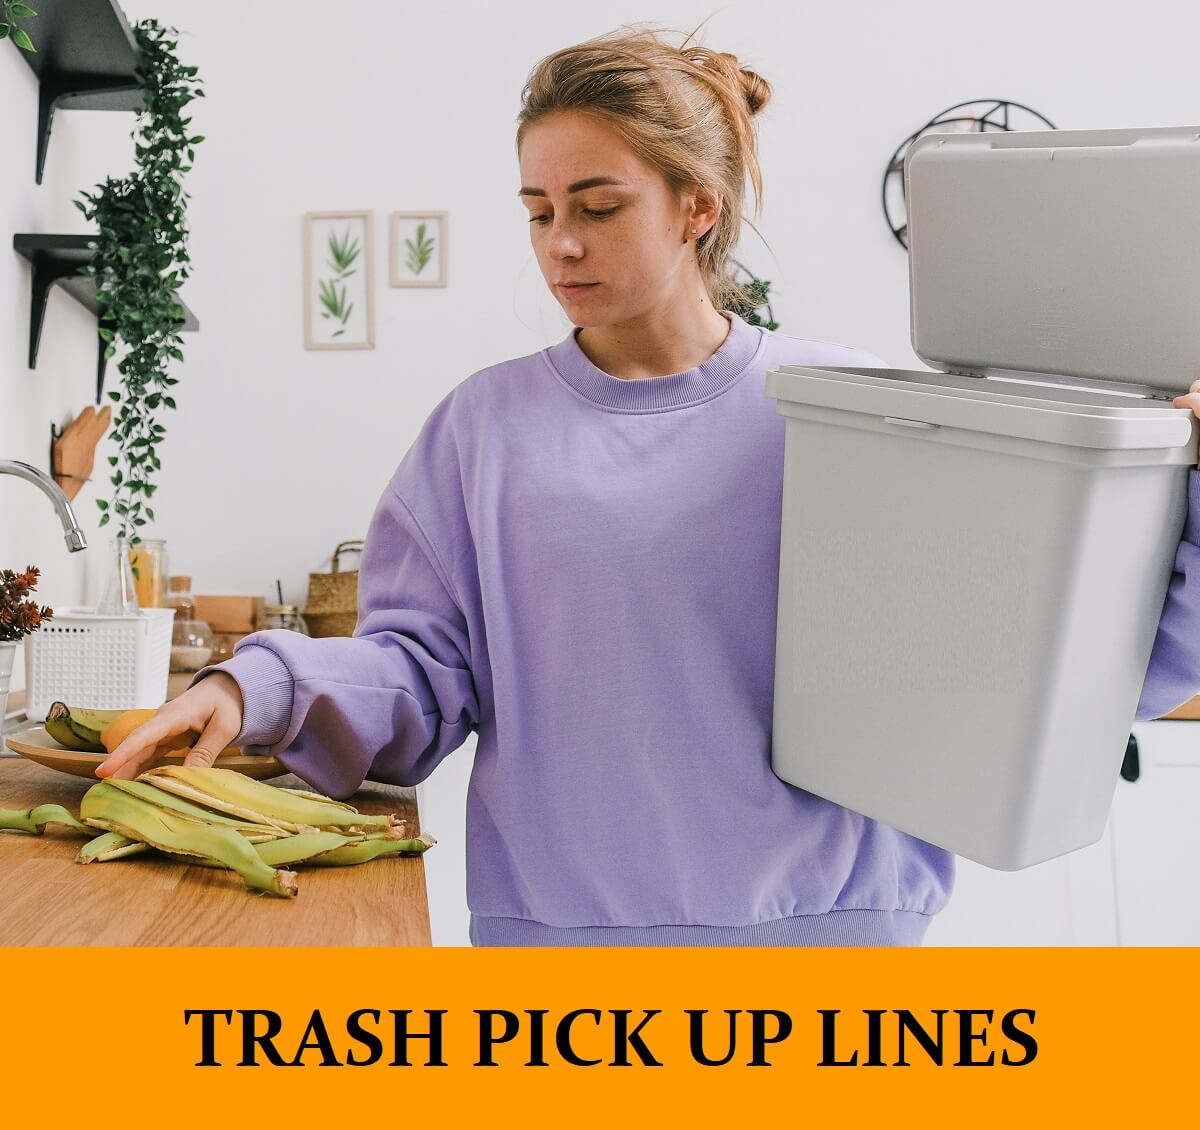 Pick Up Lines About Trash & Garbage